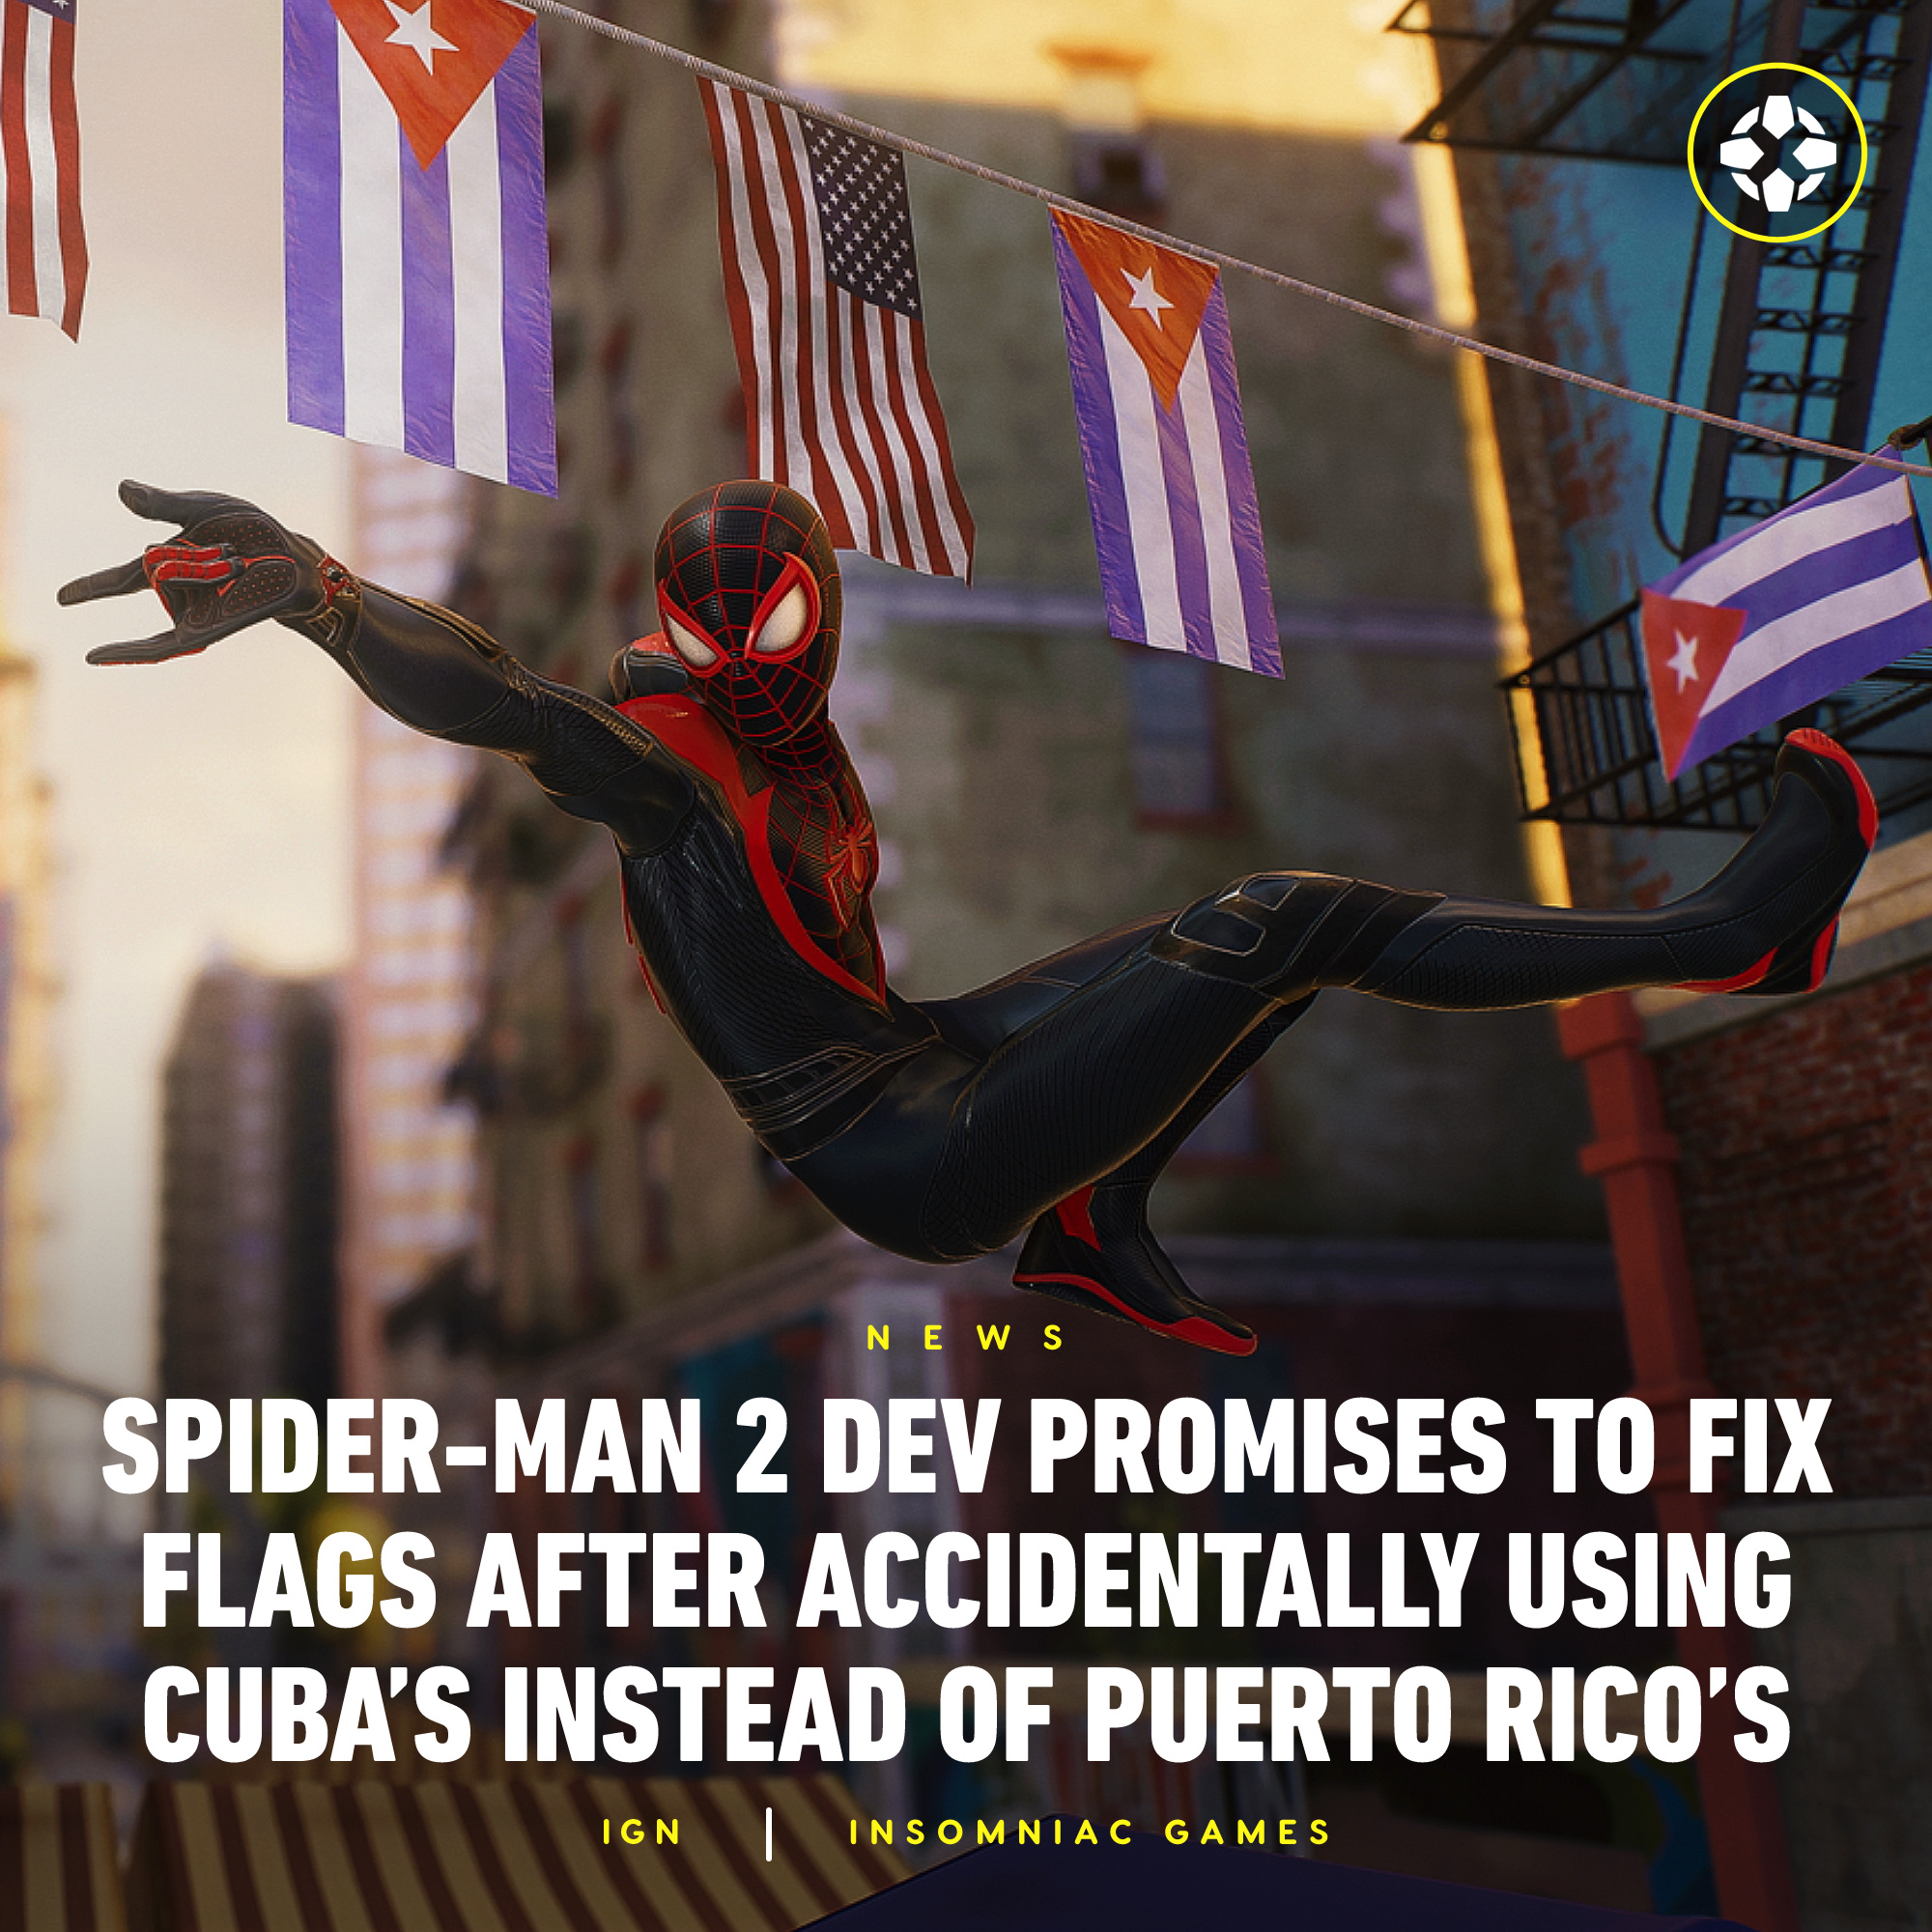 Insomniac Games promises to fix wrong flag use in Marvel's Spider